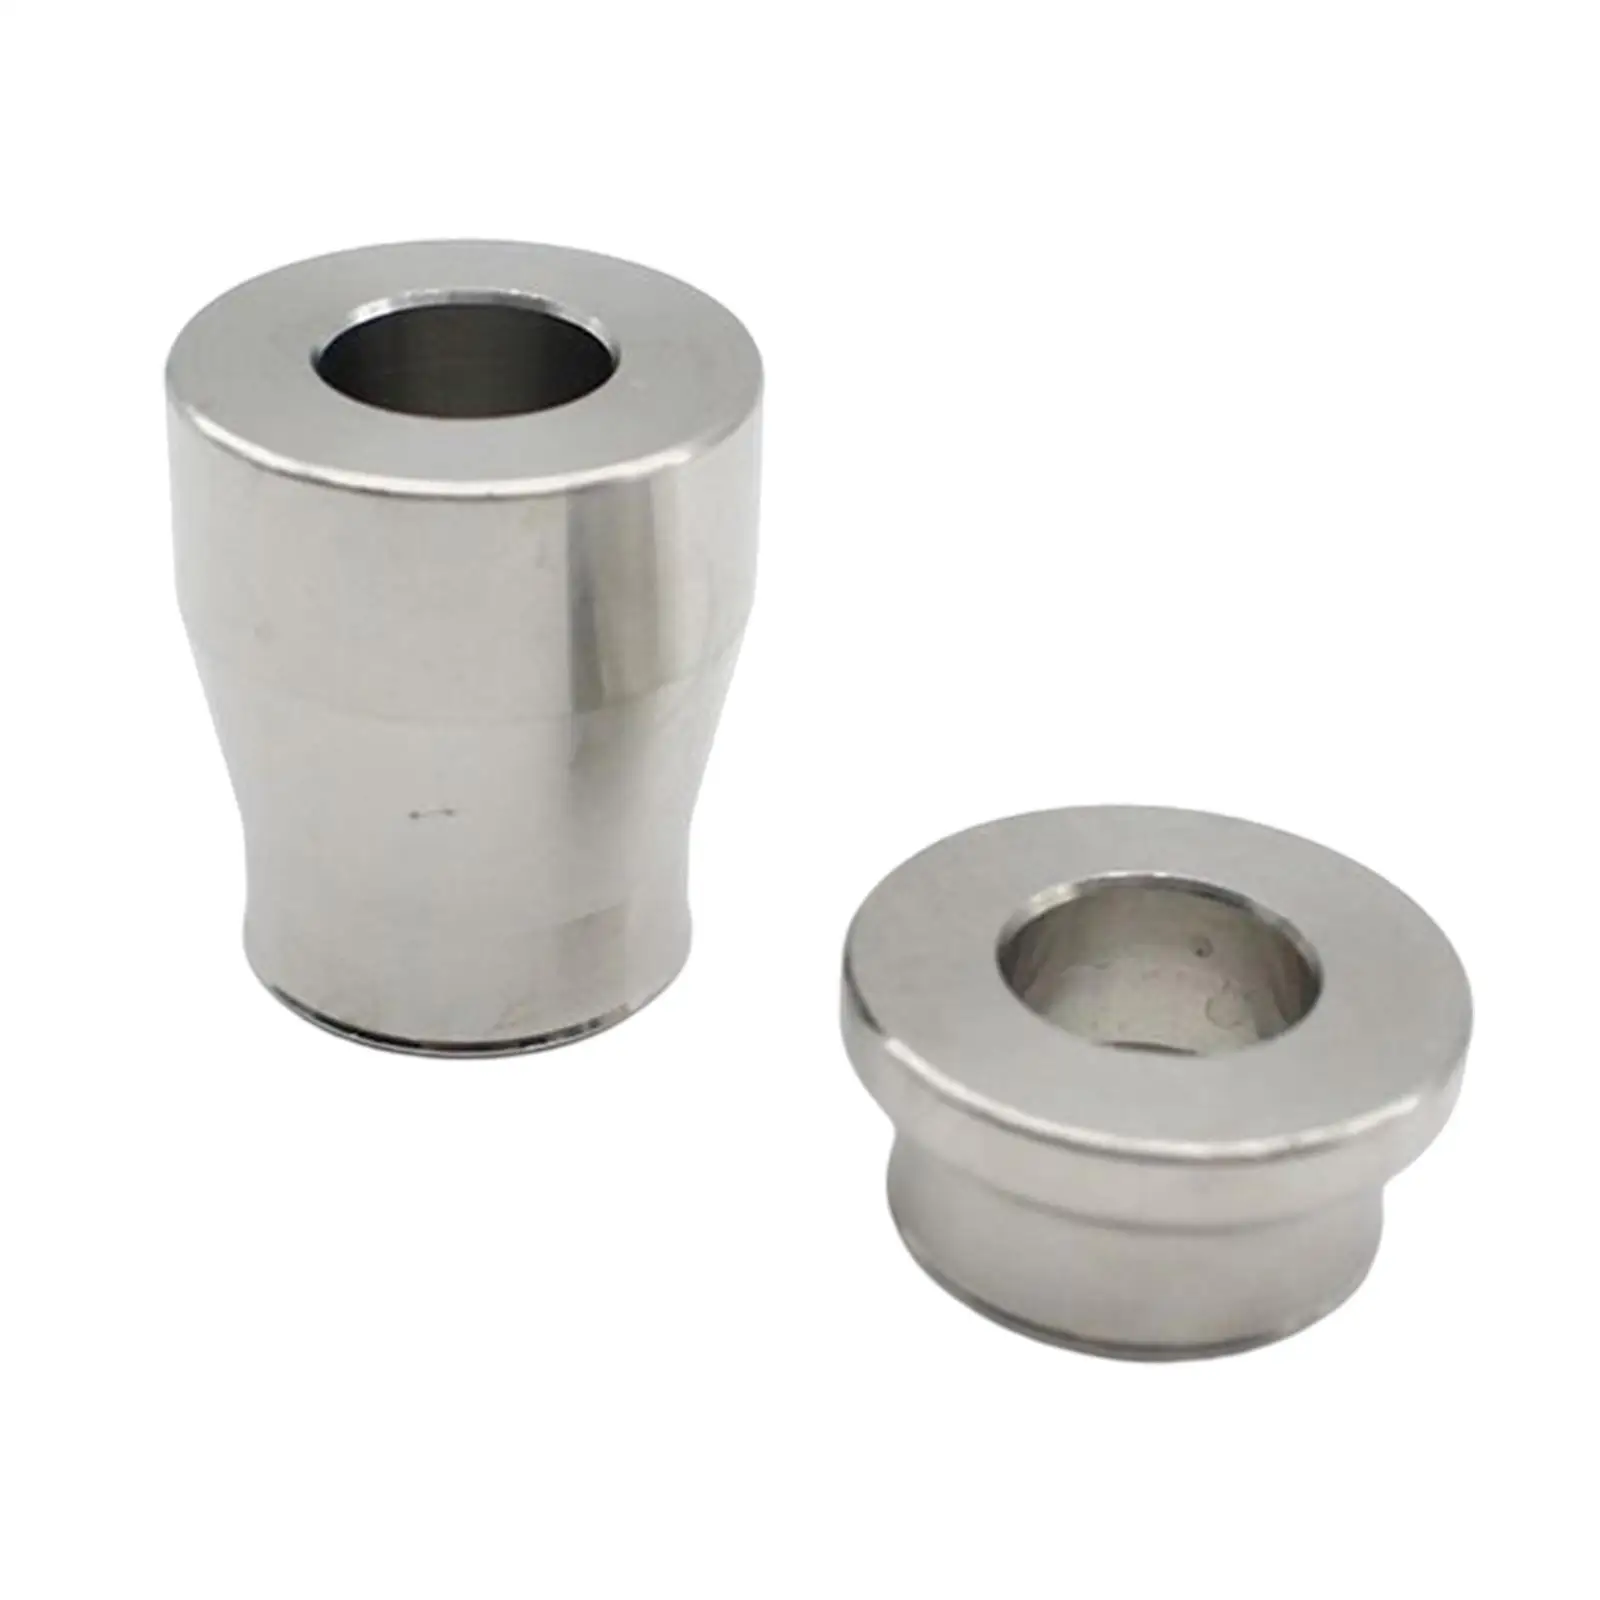 Modified Front Wheel Bushings Spare Parts Premium for Kymco Krv180